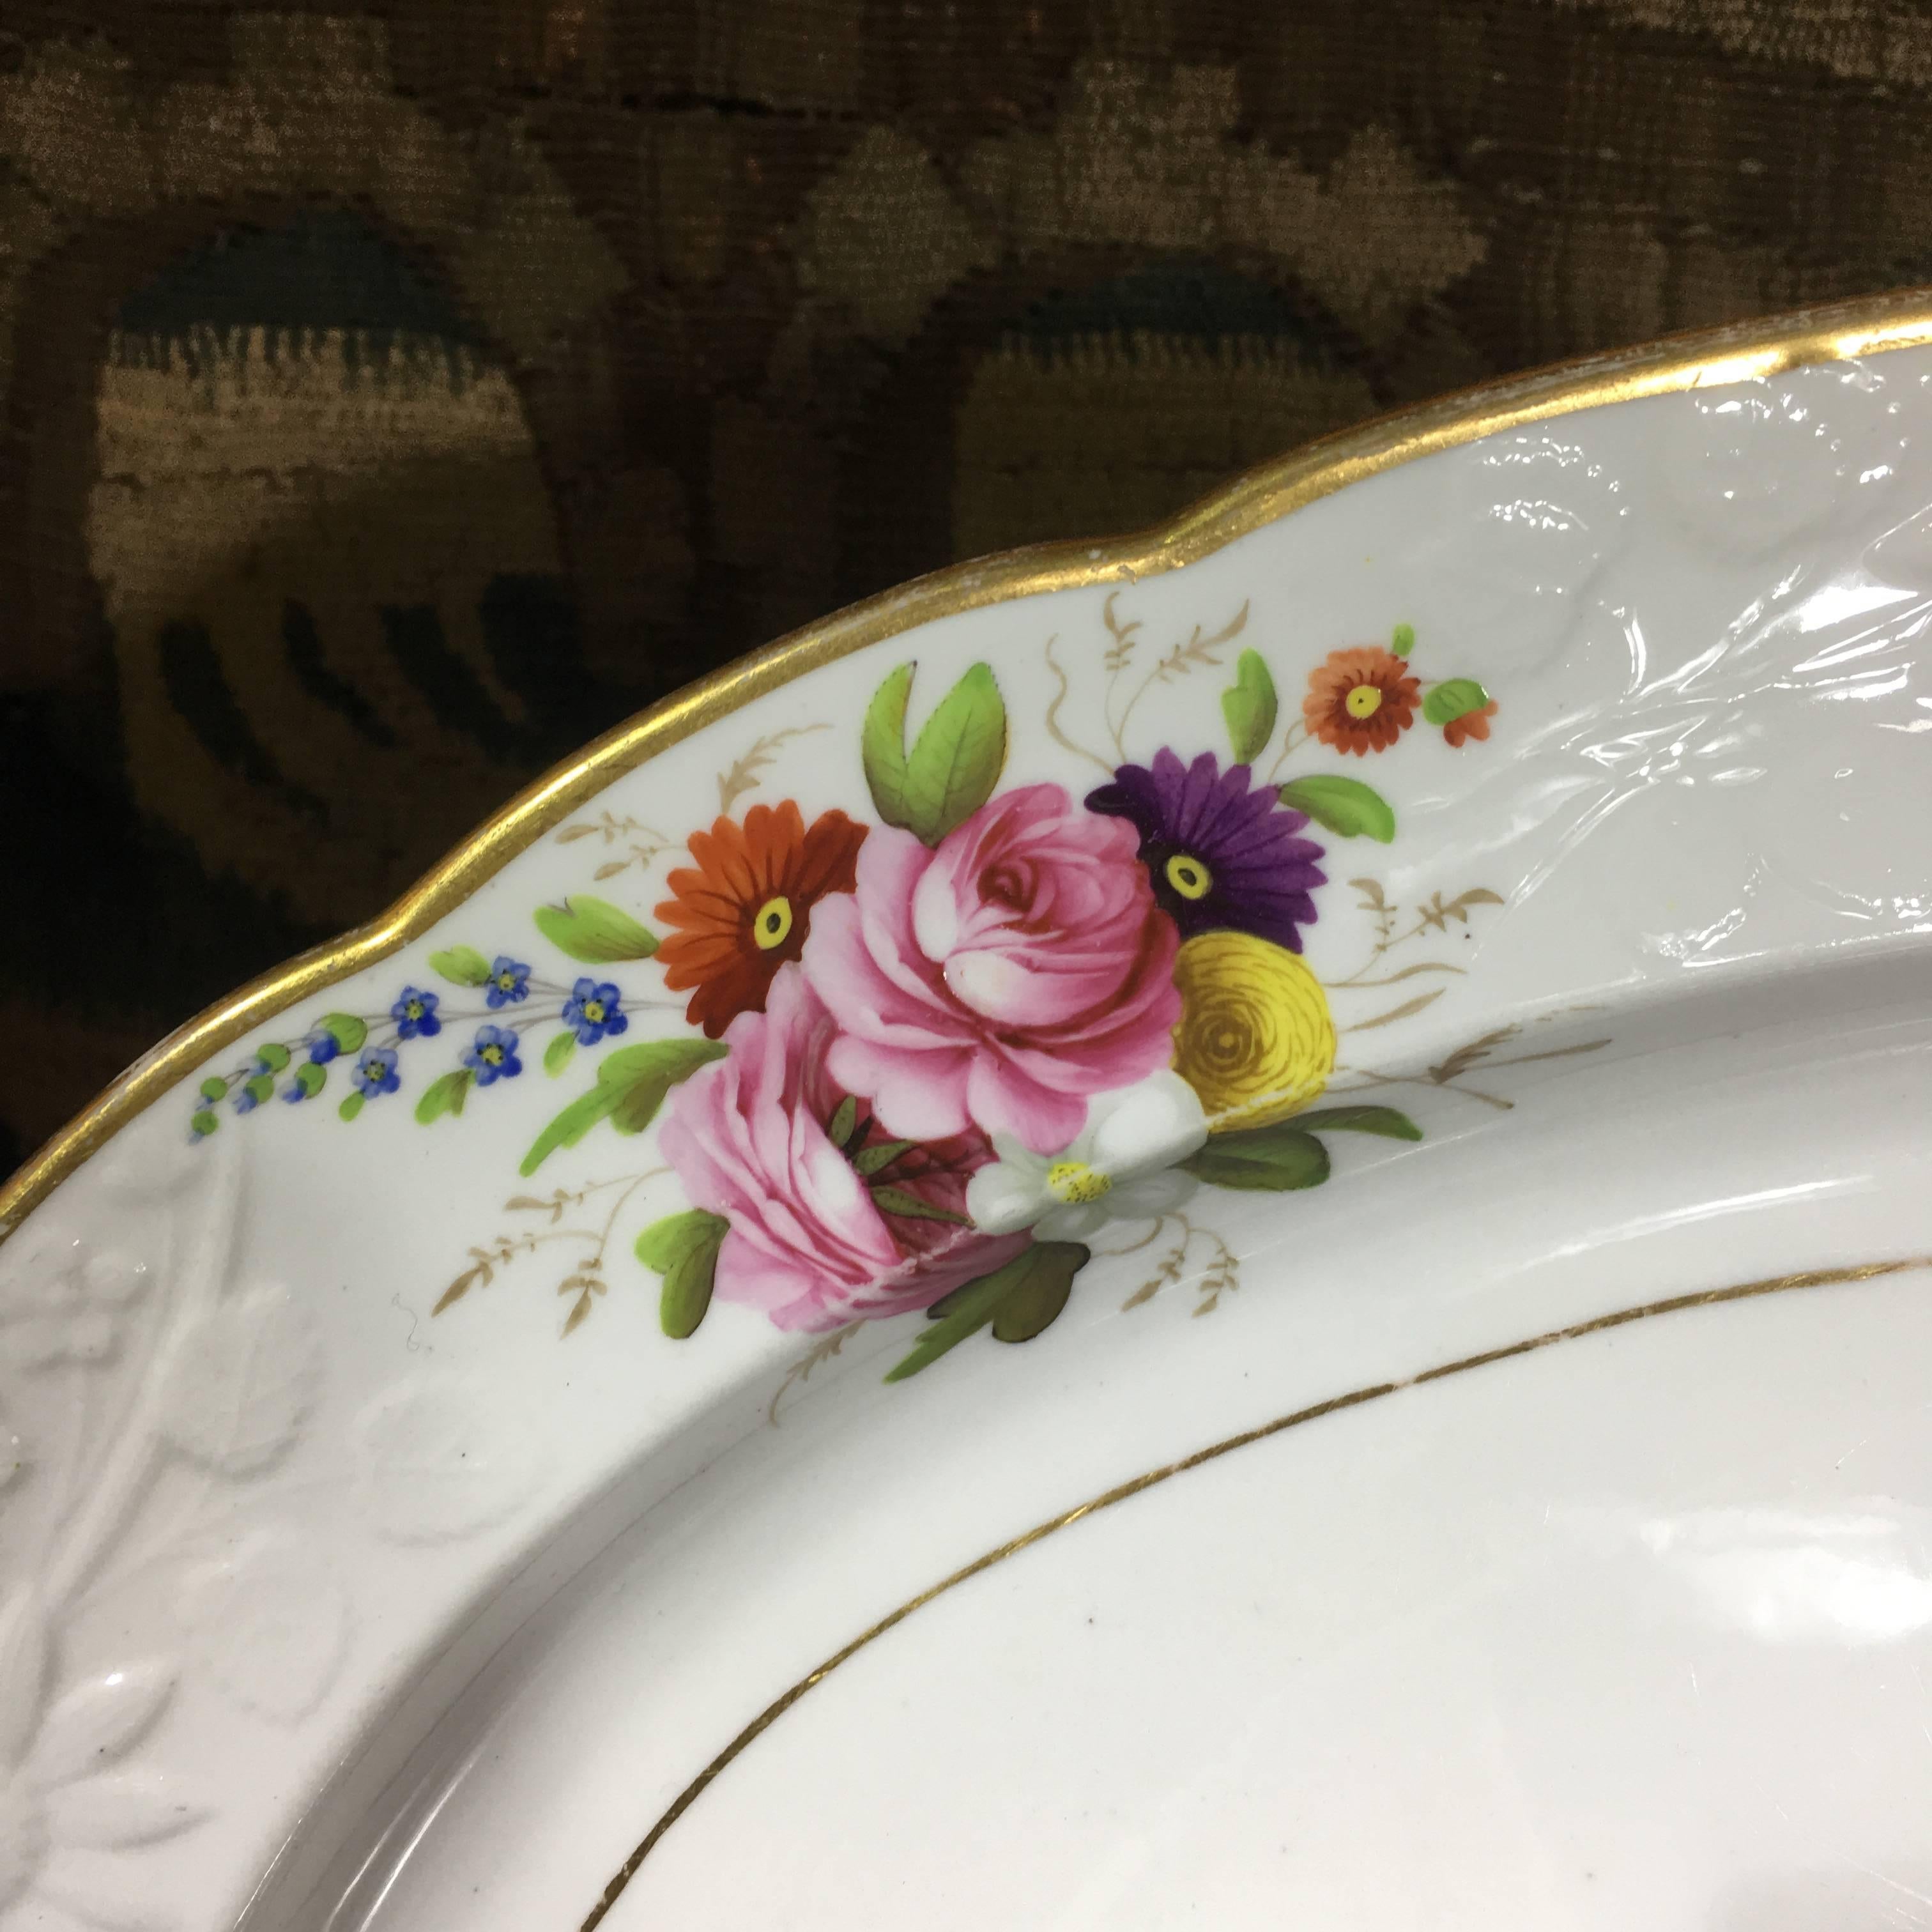 Large Spode Oval Platter, Moulded and Painted Flowers, Pat. 1943, circa 1815 In Good Condition For Sale In Geelong, Victoria